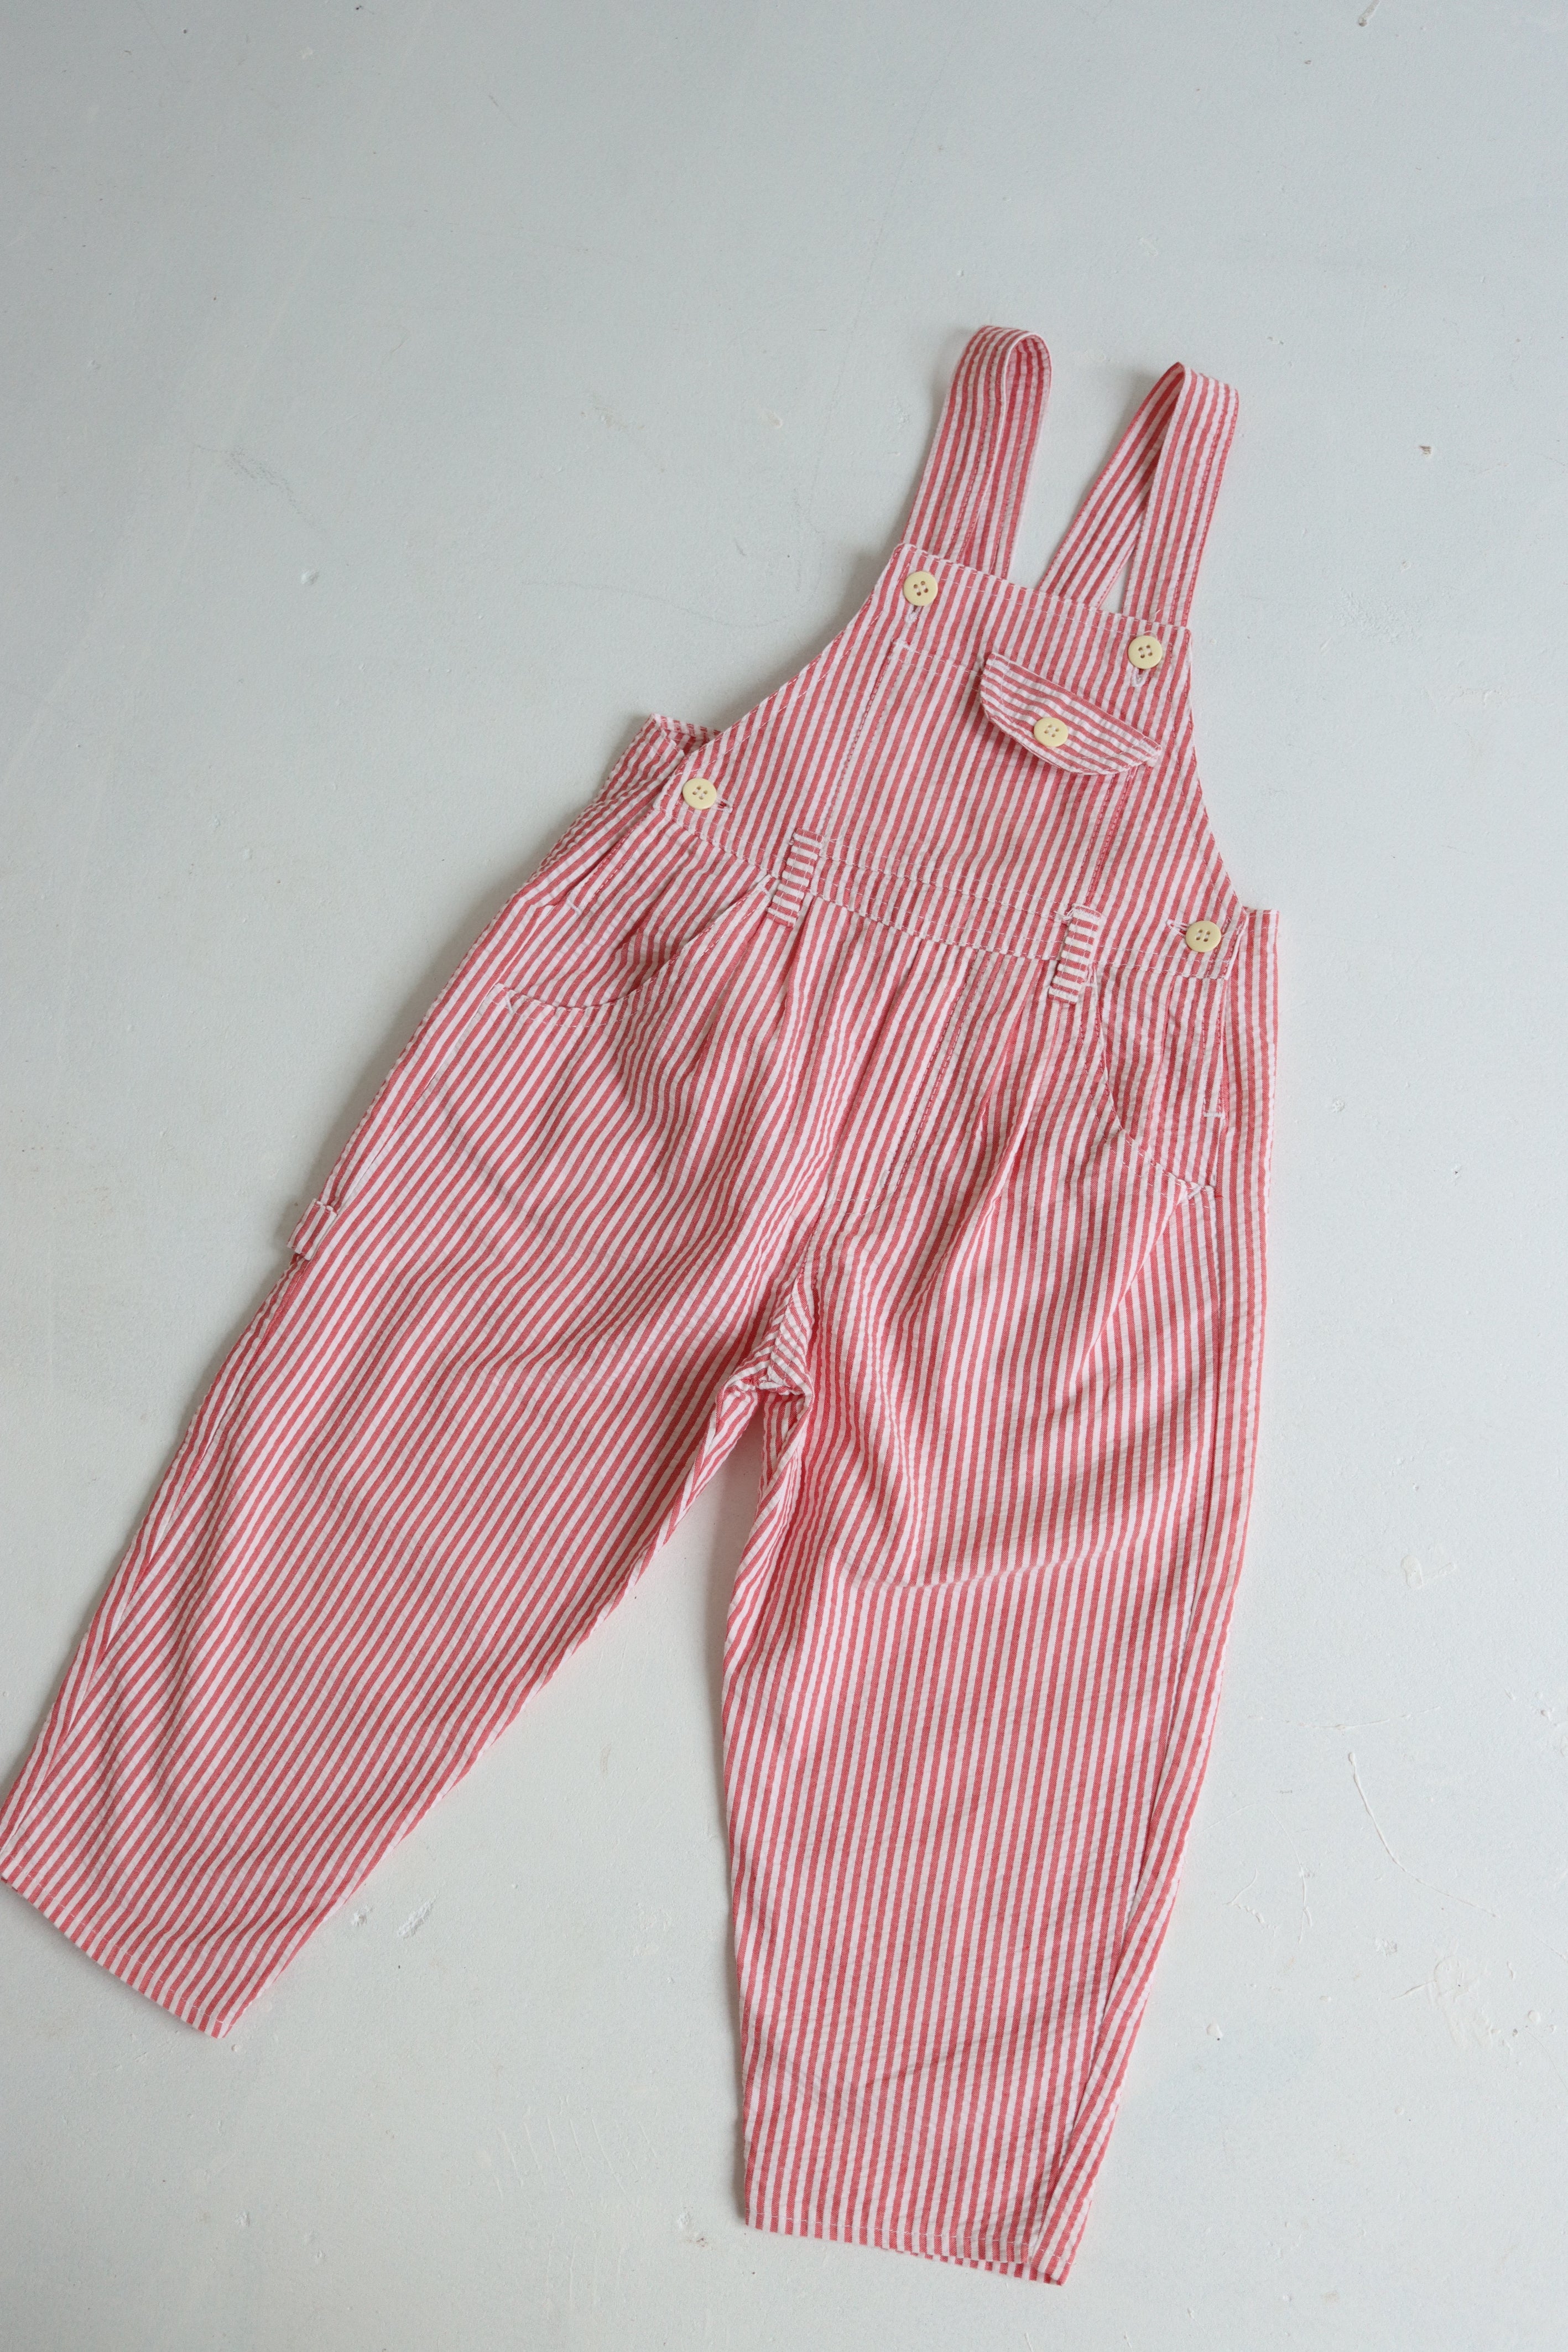 Vintage red striped overalls  - Size 3 years